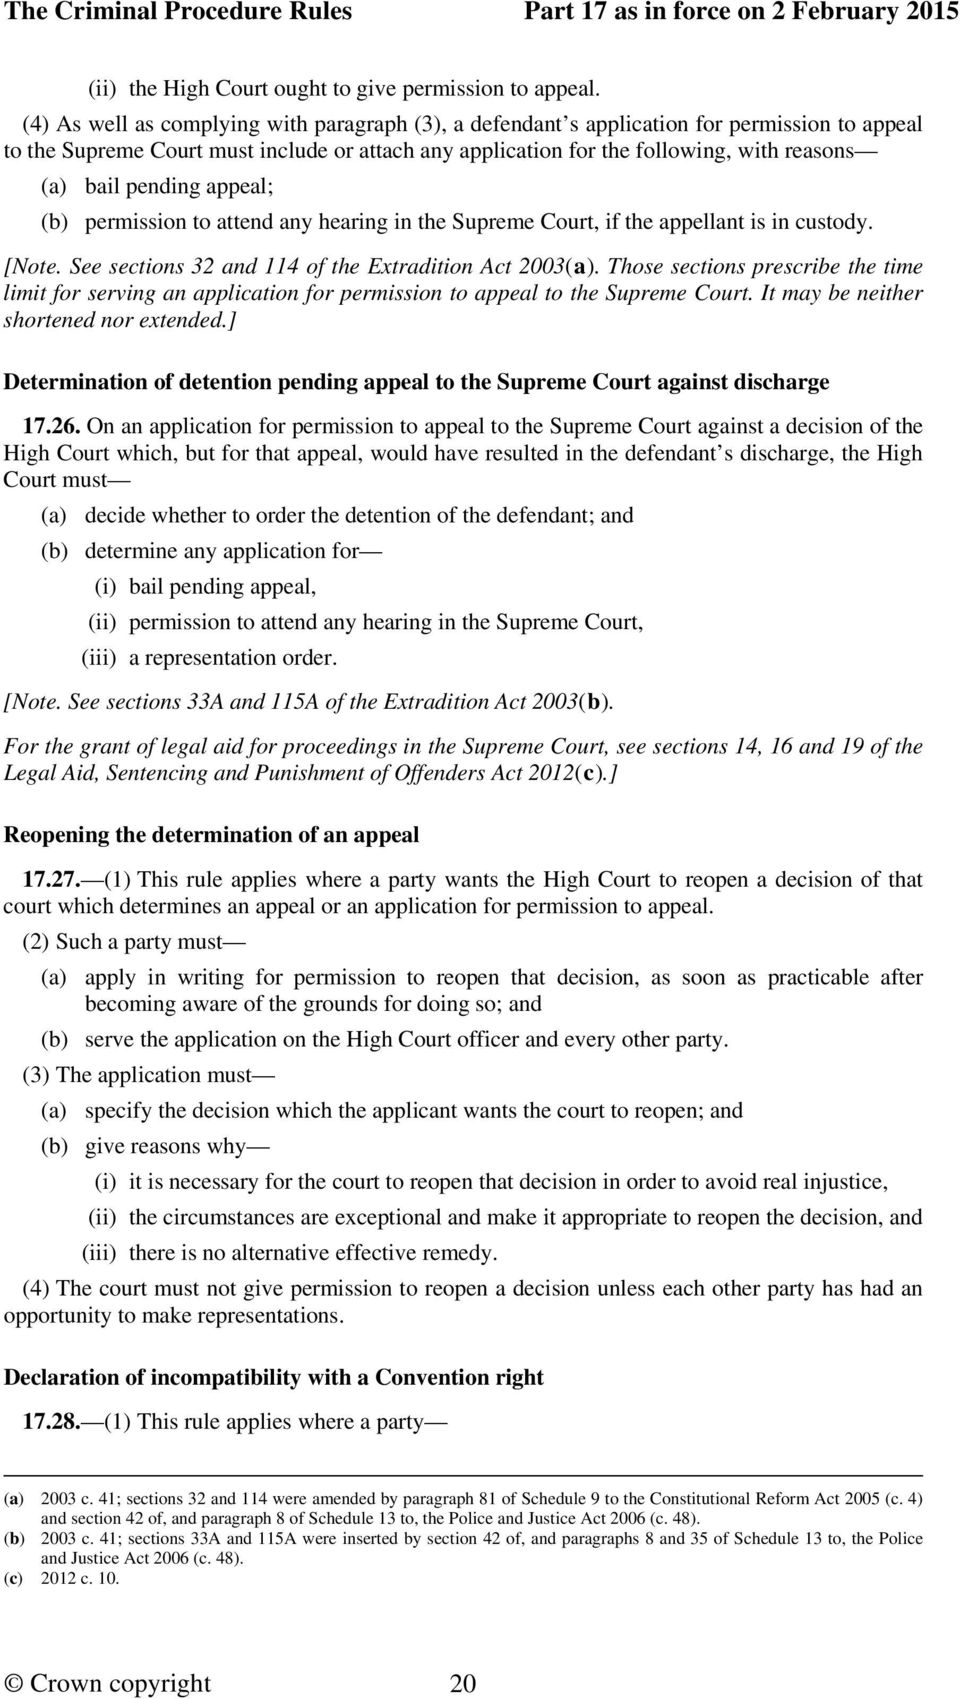 pending appeal; (b) permission to attend any hearing in the Supreme Court, if the appellant is in custody. [Note. See sections 32 and 114 of the Extradition Act 2003(a).